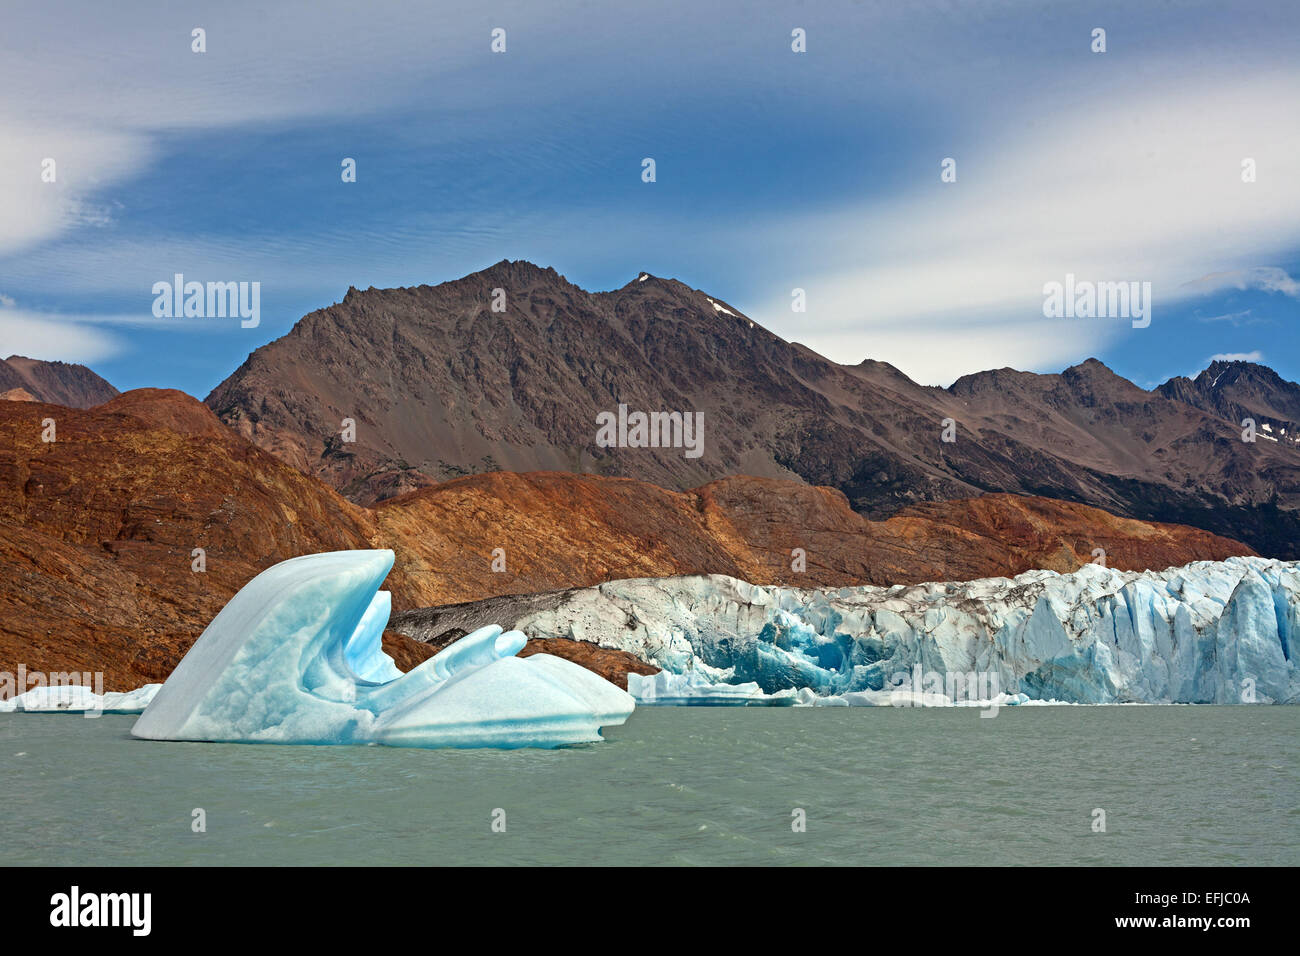 The large Viedma Glacier on the Southern Patagonian Ice Field in Argentina Stock Photo